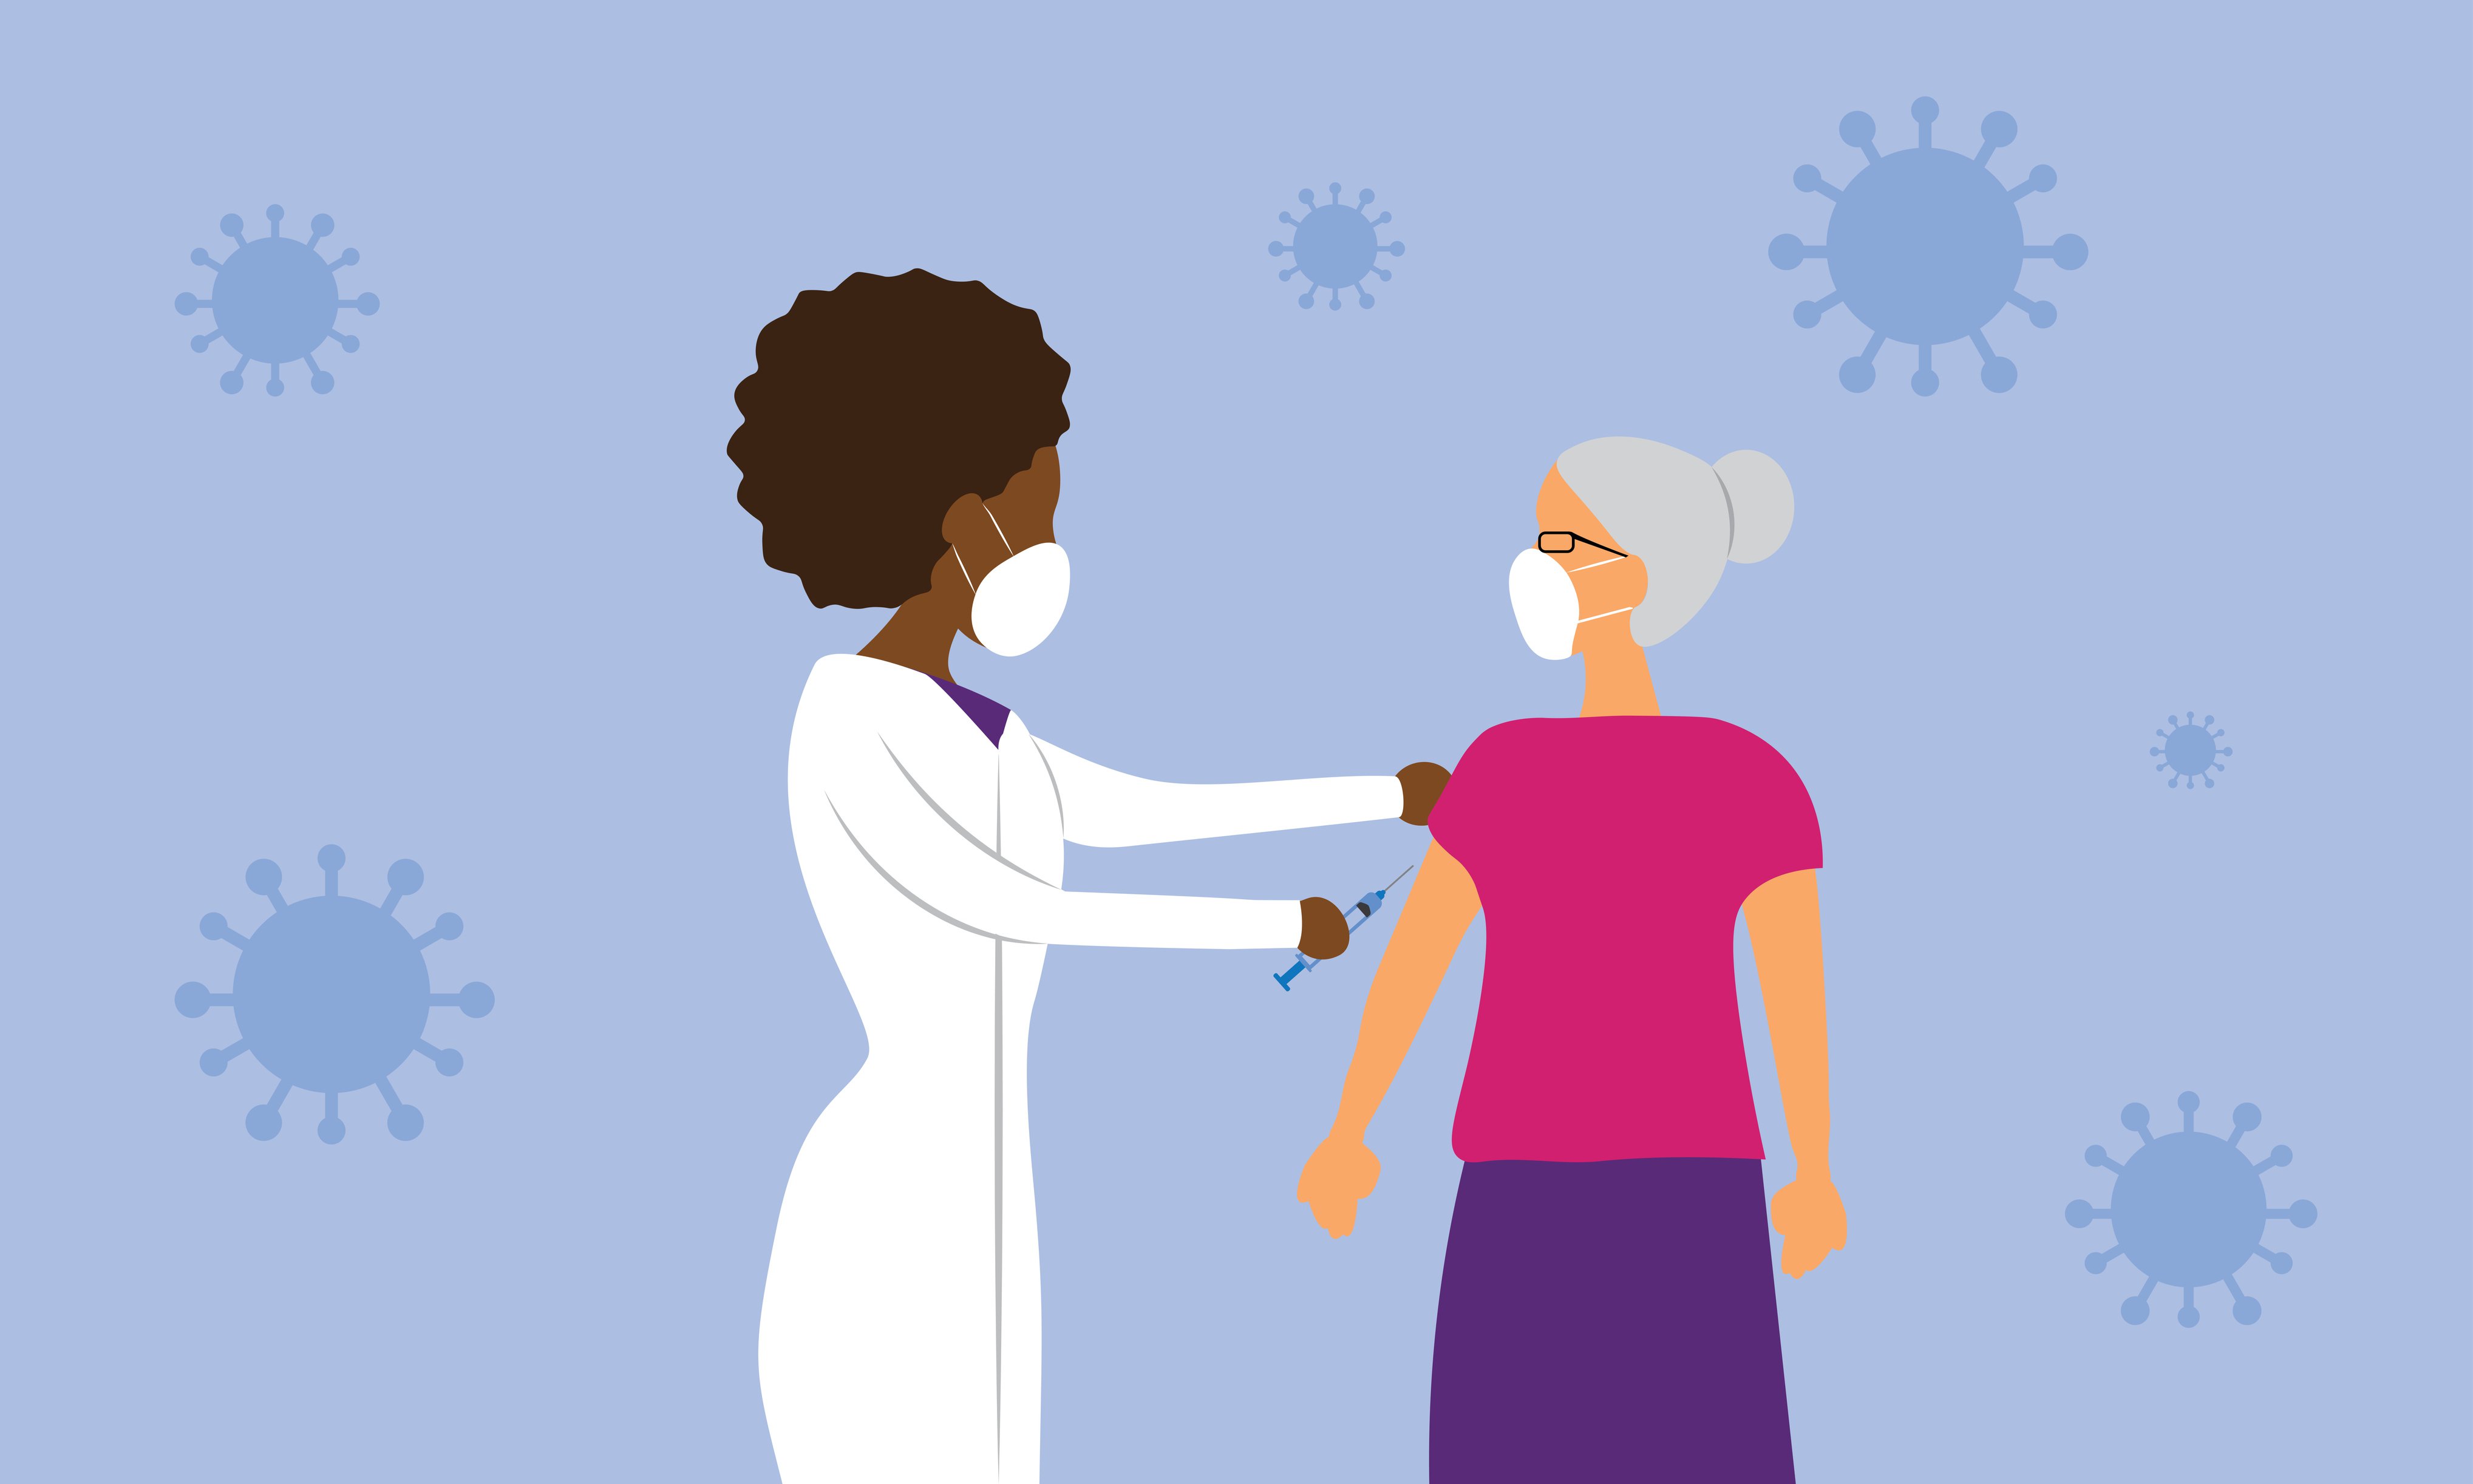 Graphic cartoon image of clinician giving a vaccine to a patient.jpg